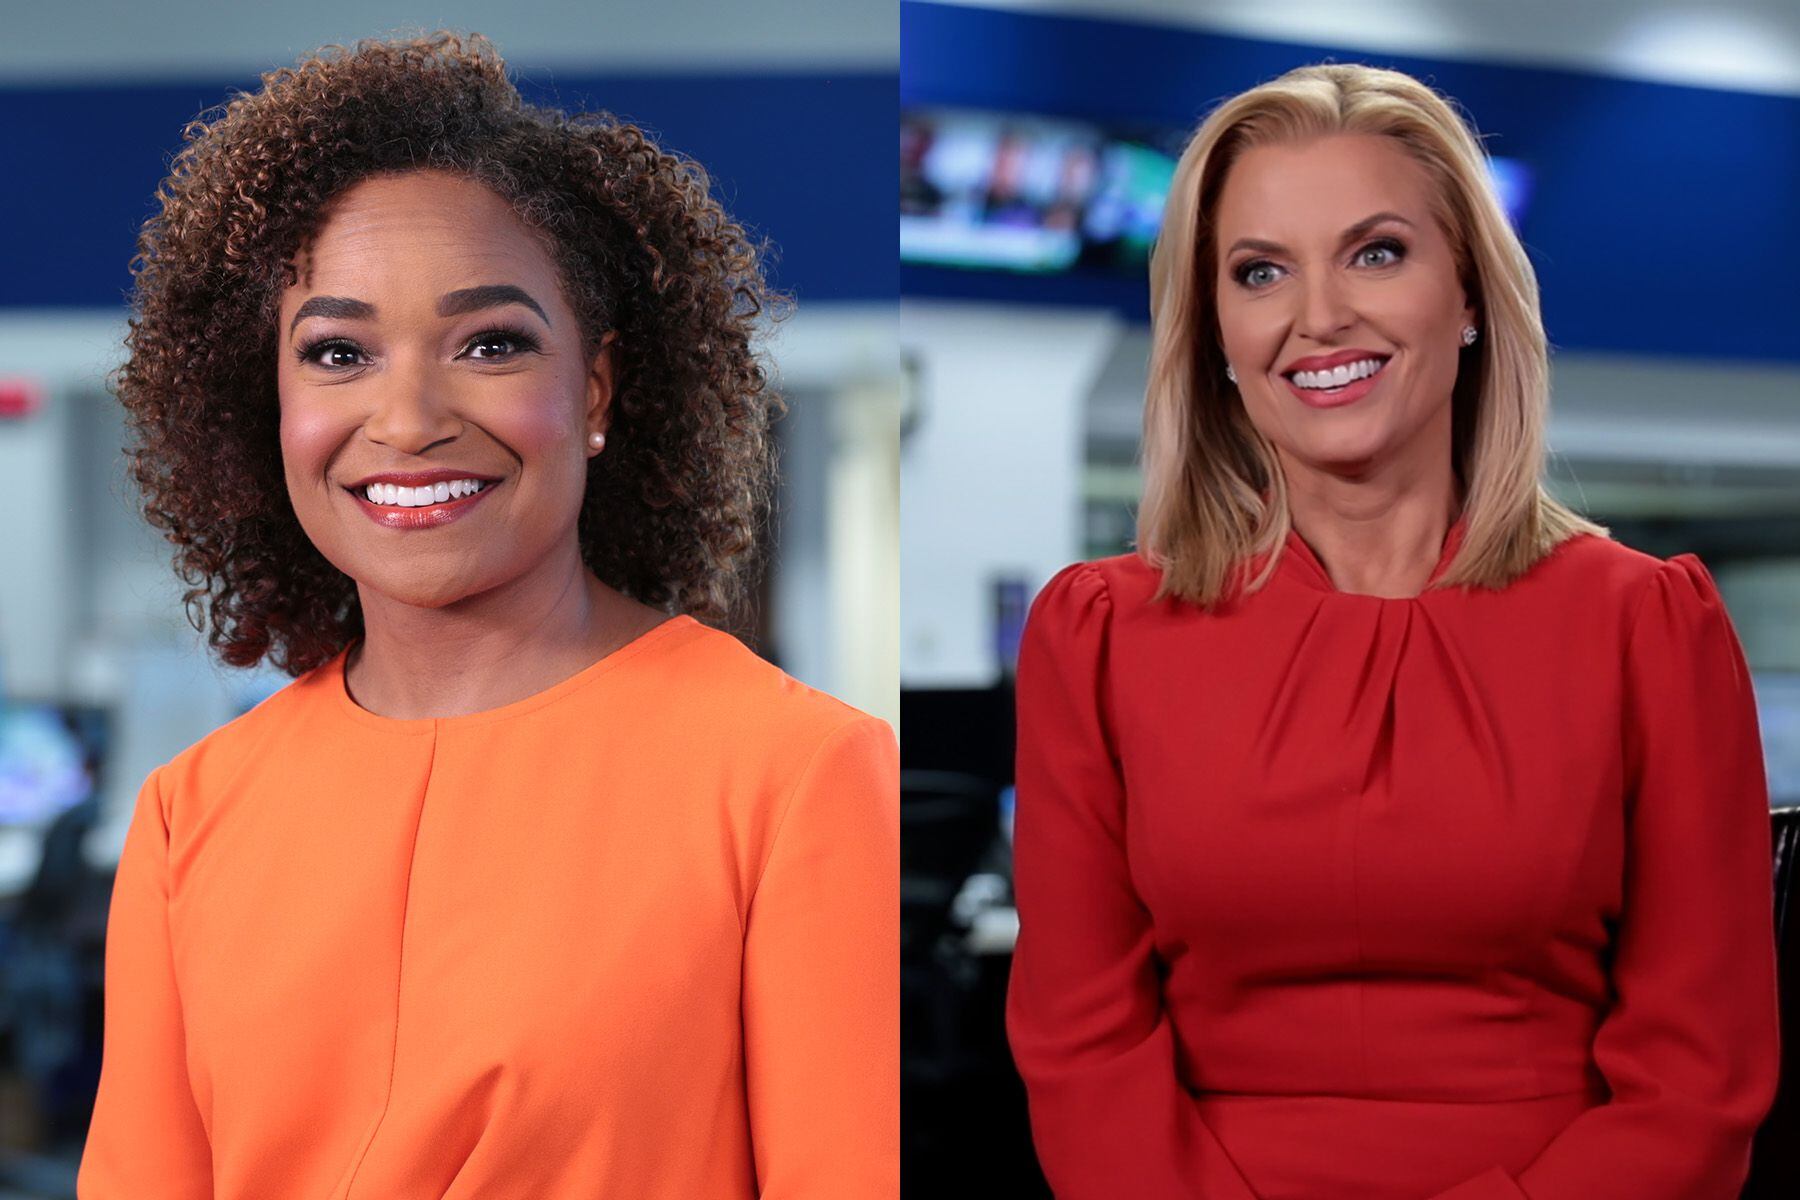 Lori Wilson Becomes Morning Anchor On Wsb Tv Linda Stouffer Switches To New Role